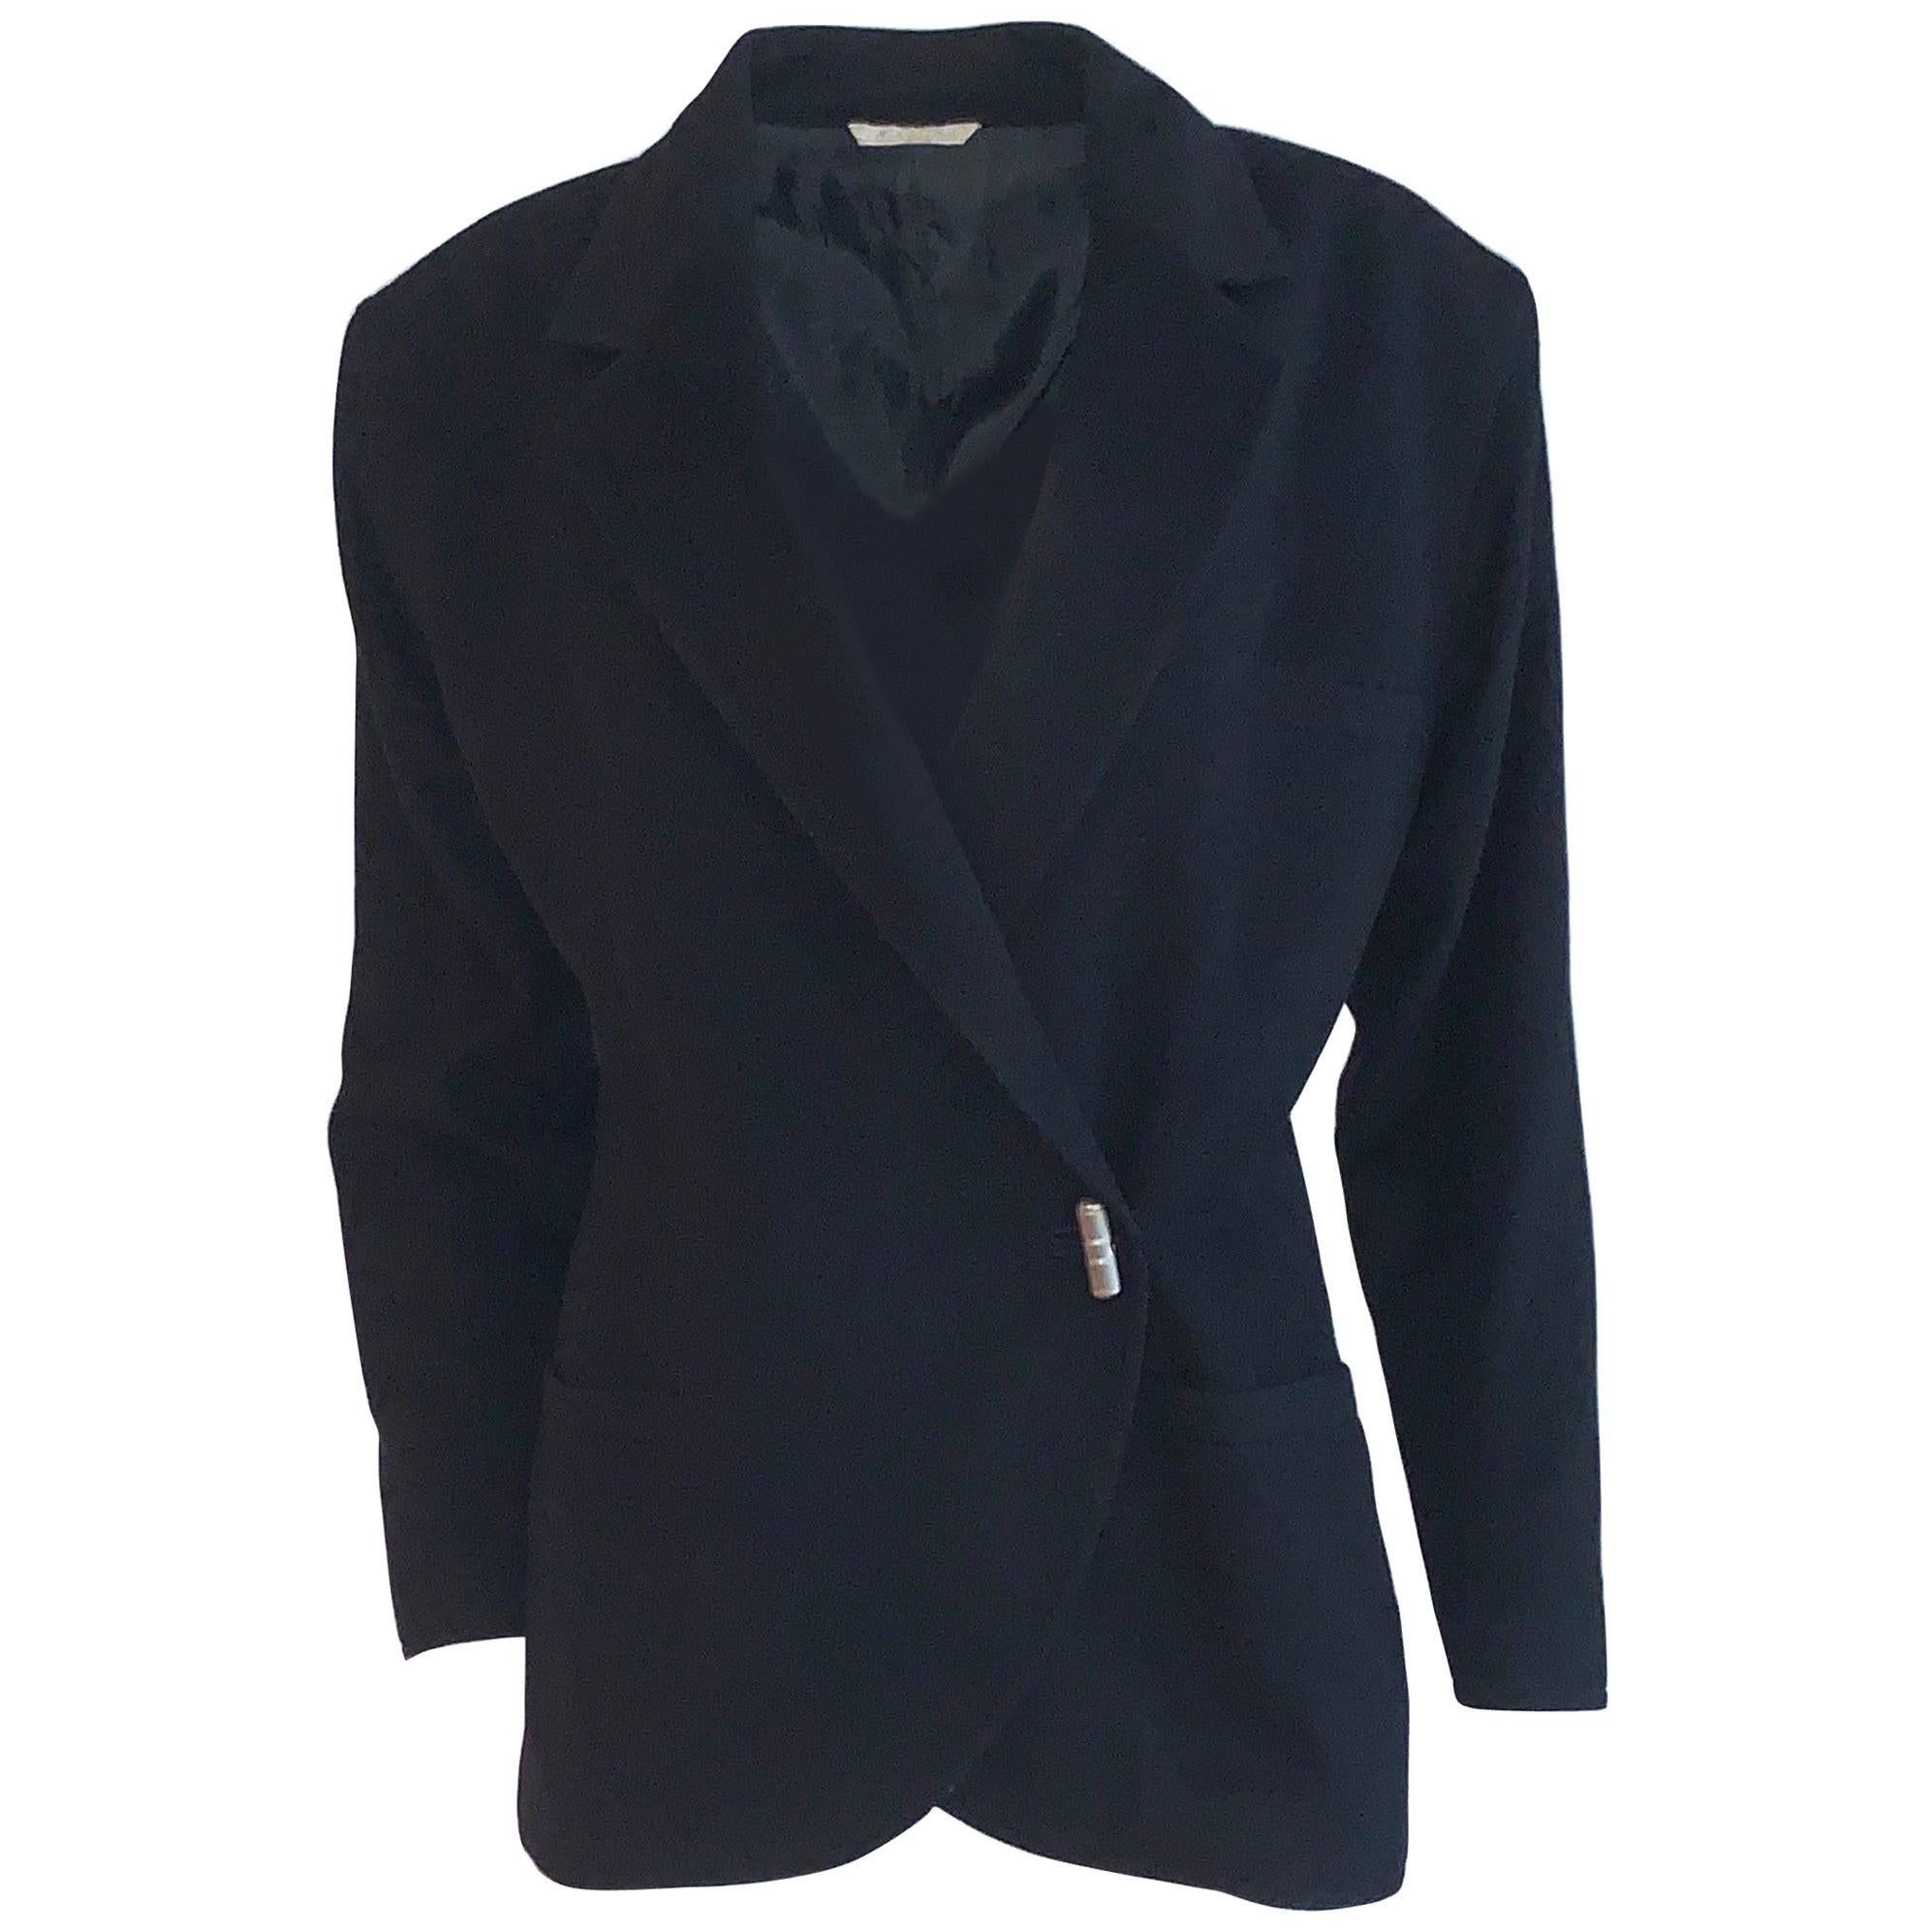 Gianni Versace 1980s Black Wool Blazer with Silver Toggle Style Buttons